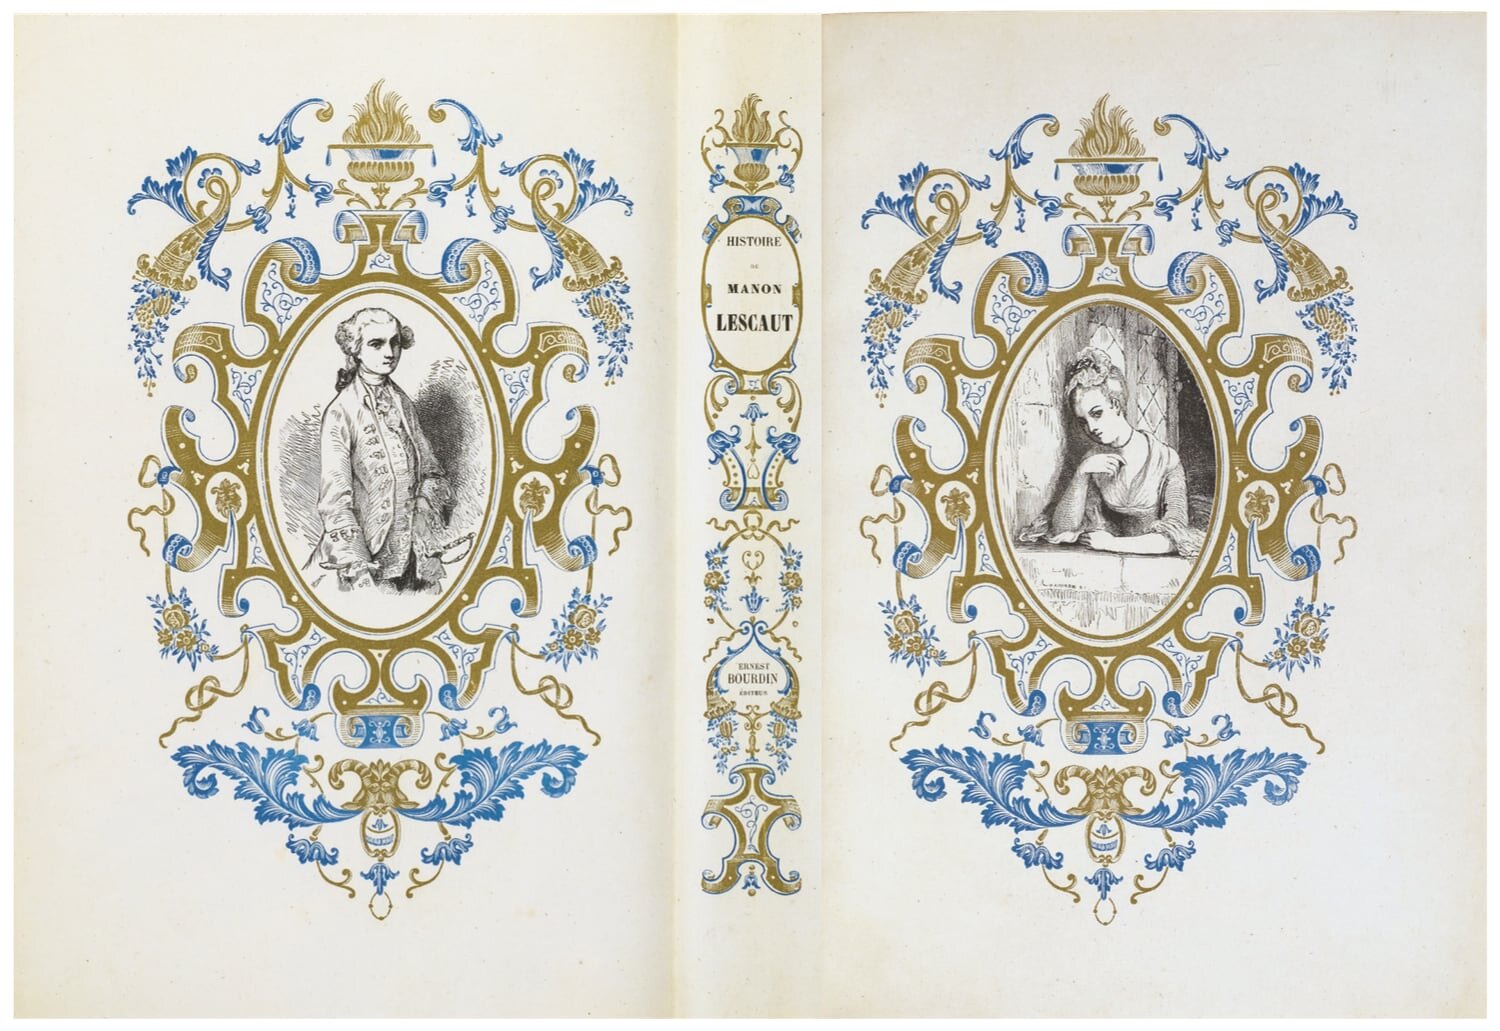  Two double-sided copies of  Manon Lescaut  on China paper; one with its original covers bound by Émile Mercier [no. 513], the other in a signed morocco binding by Bauzonnet-Trautz [no. 514] 